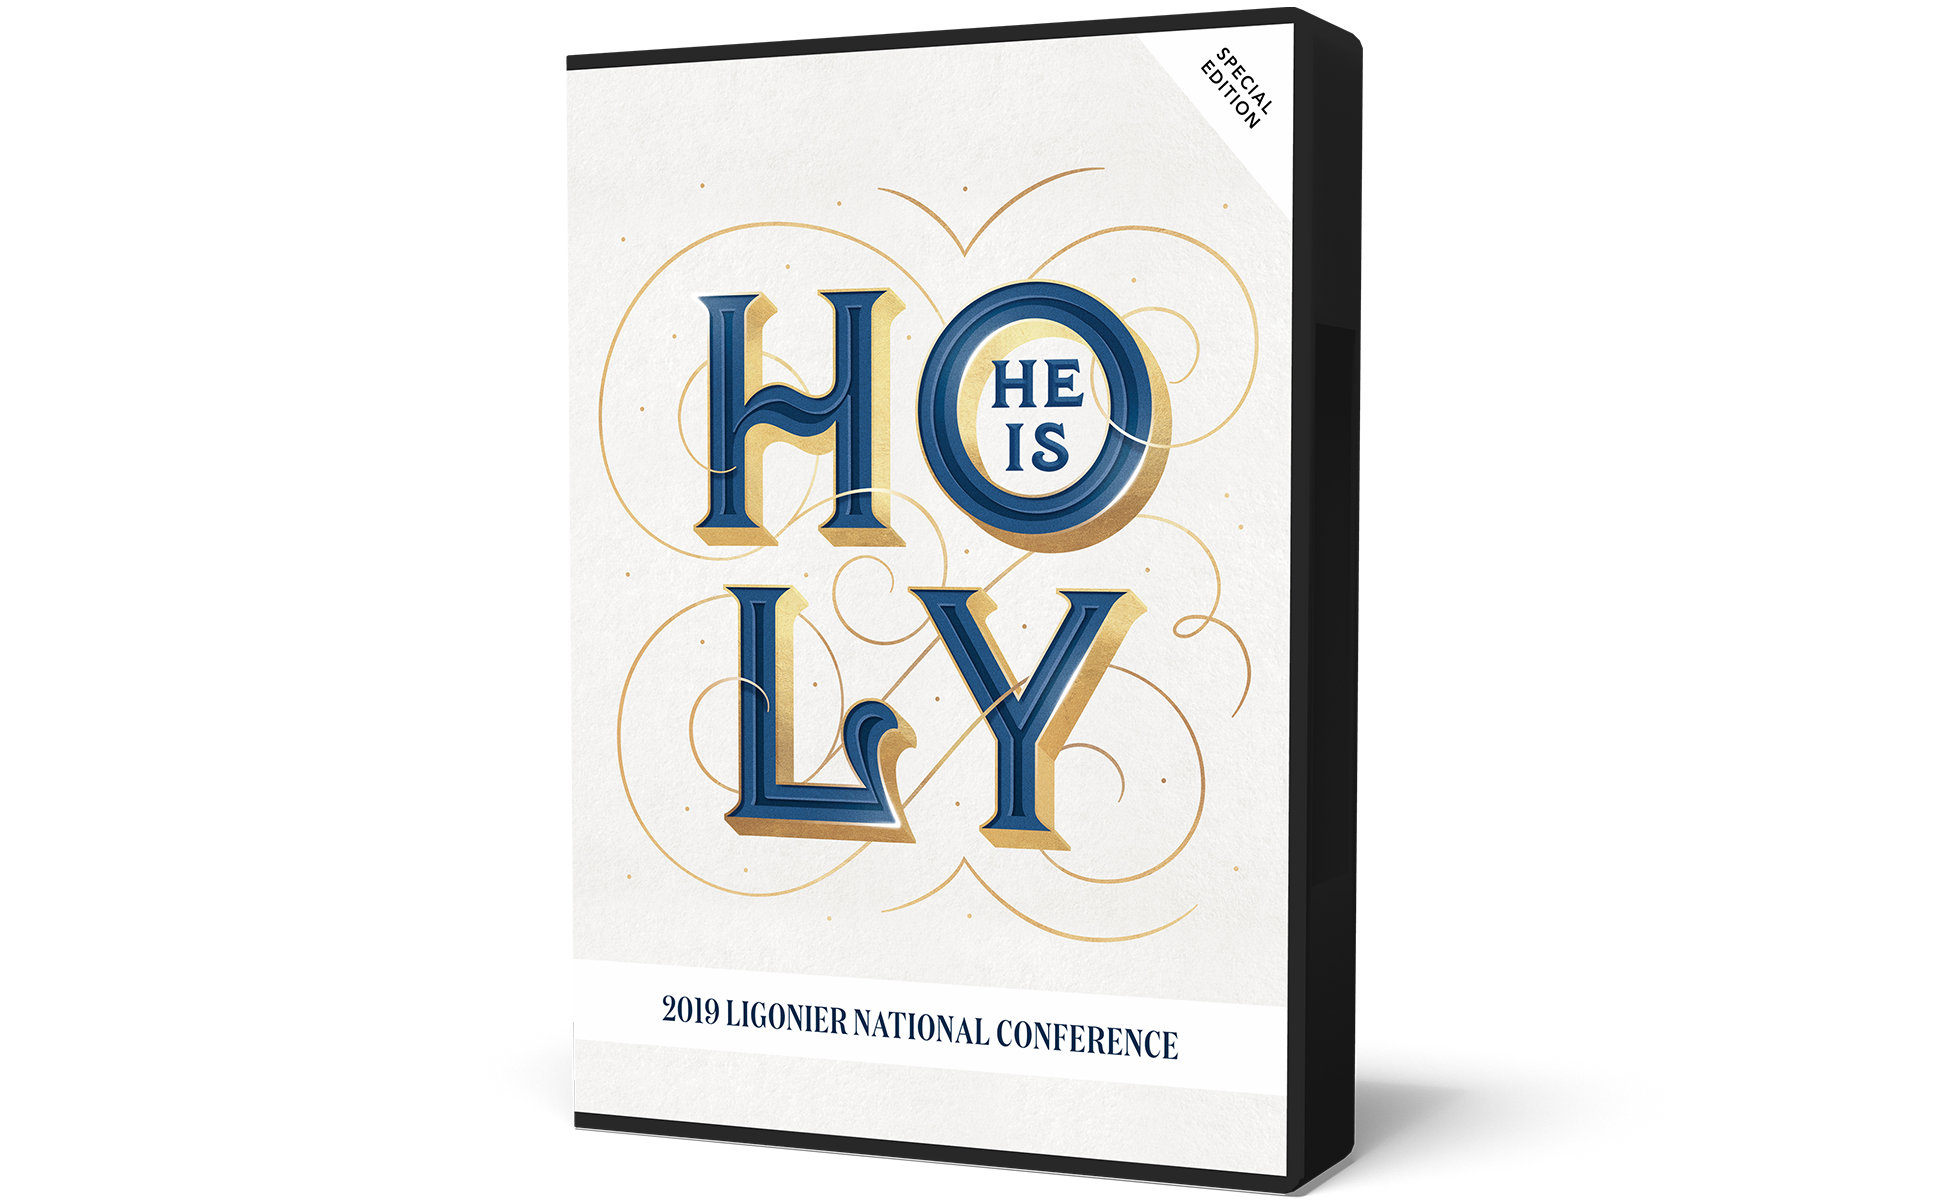 He Is Holy: 2019 National Conference Special Edition DVD